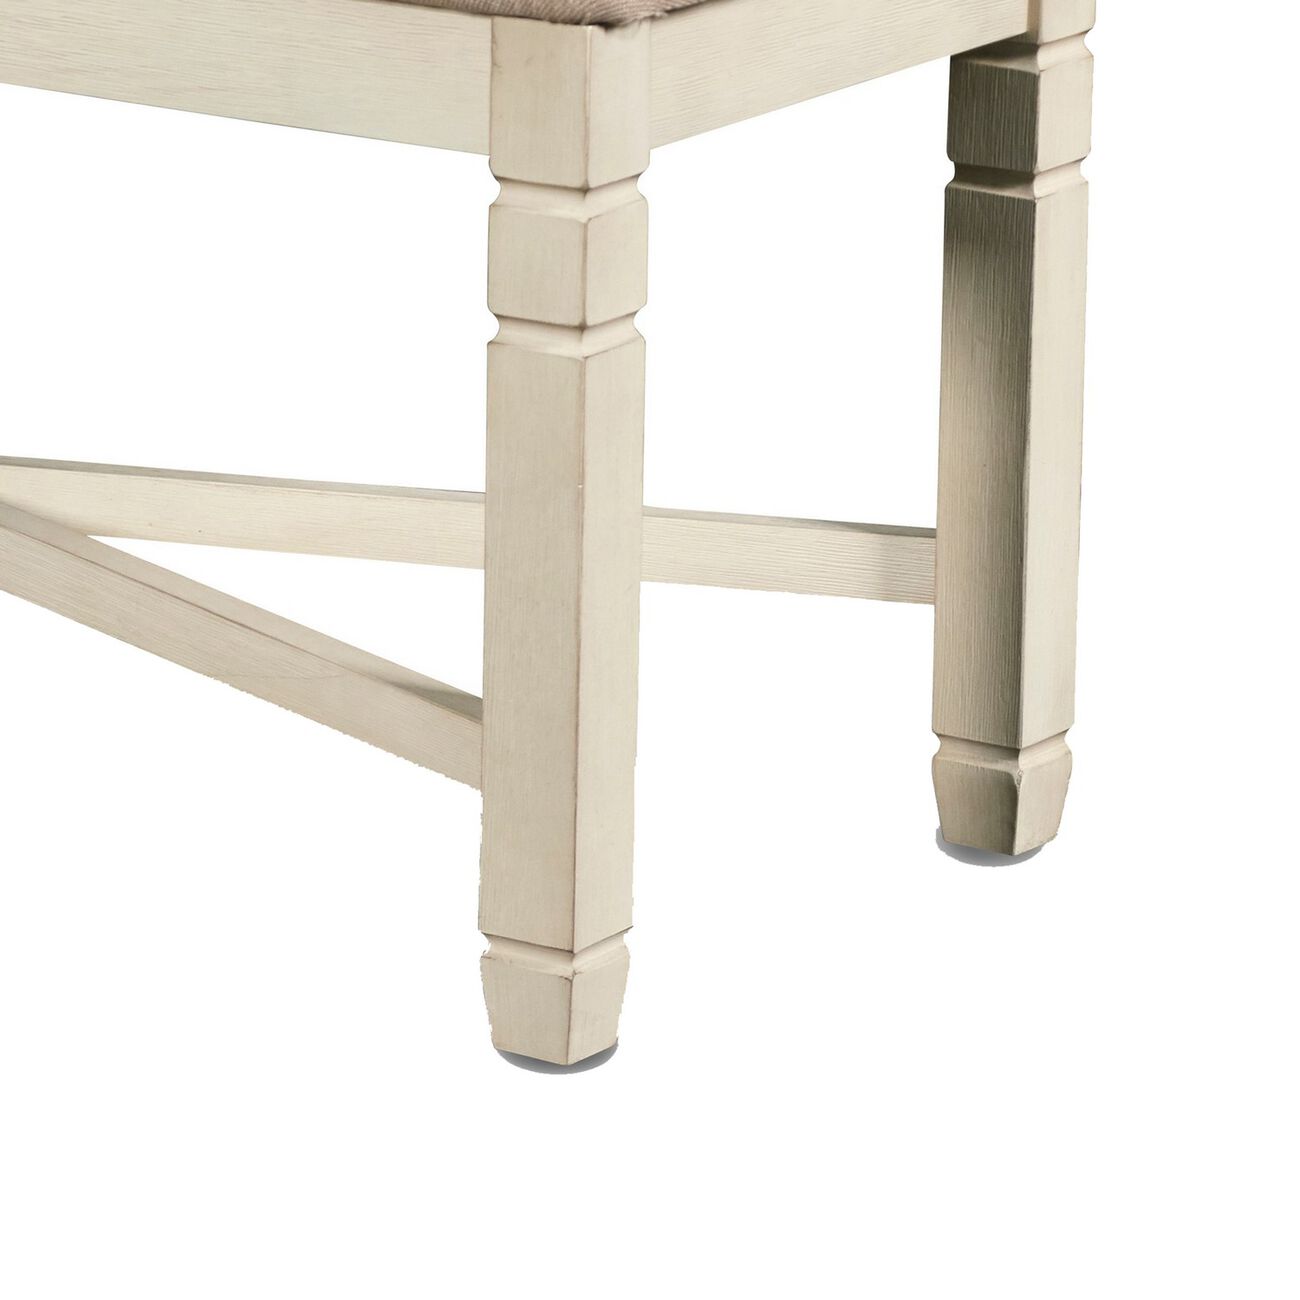 Fabric Dining Bench with Turned Legs and X Shaped Support, Beige and White